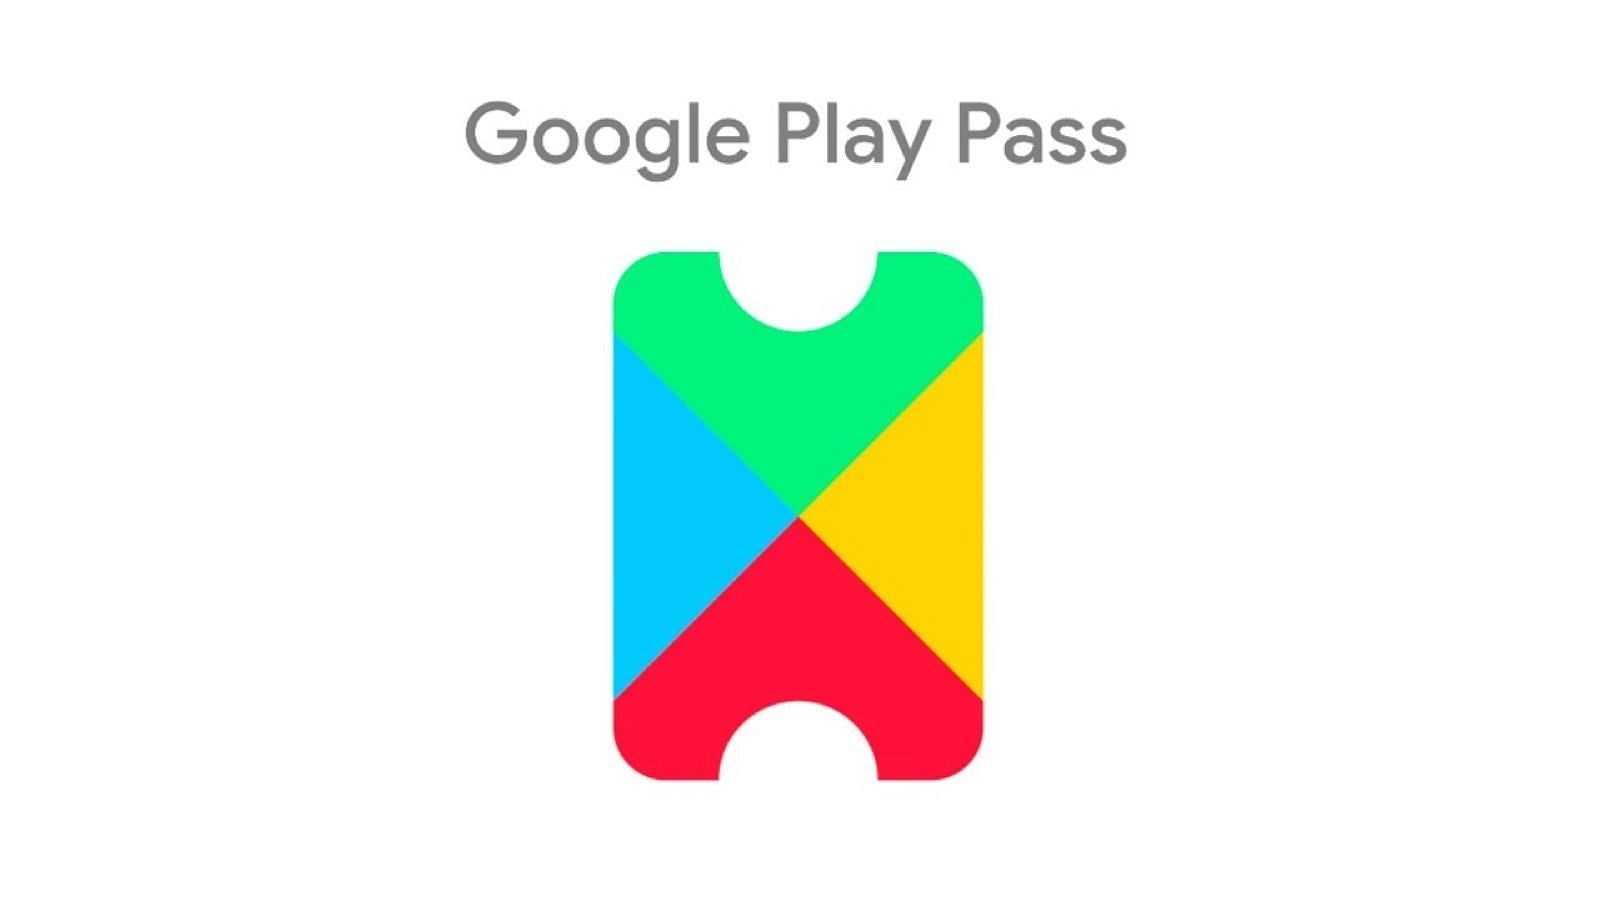 HandyGames to join Google Play Pass with a strong premium games lineup